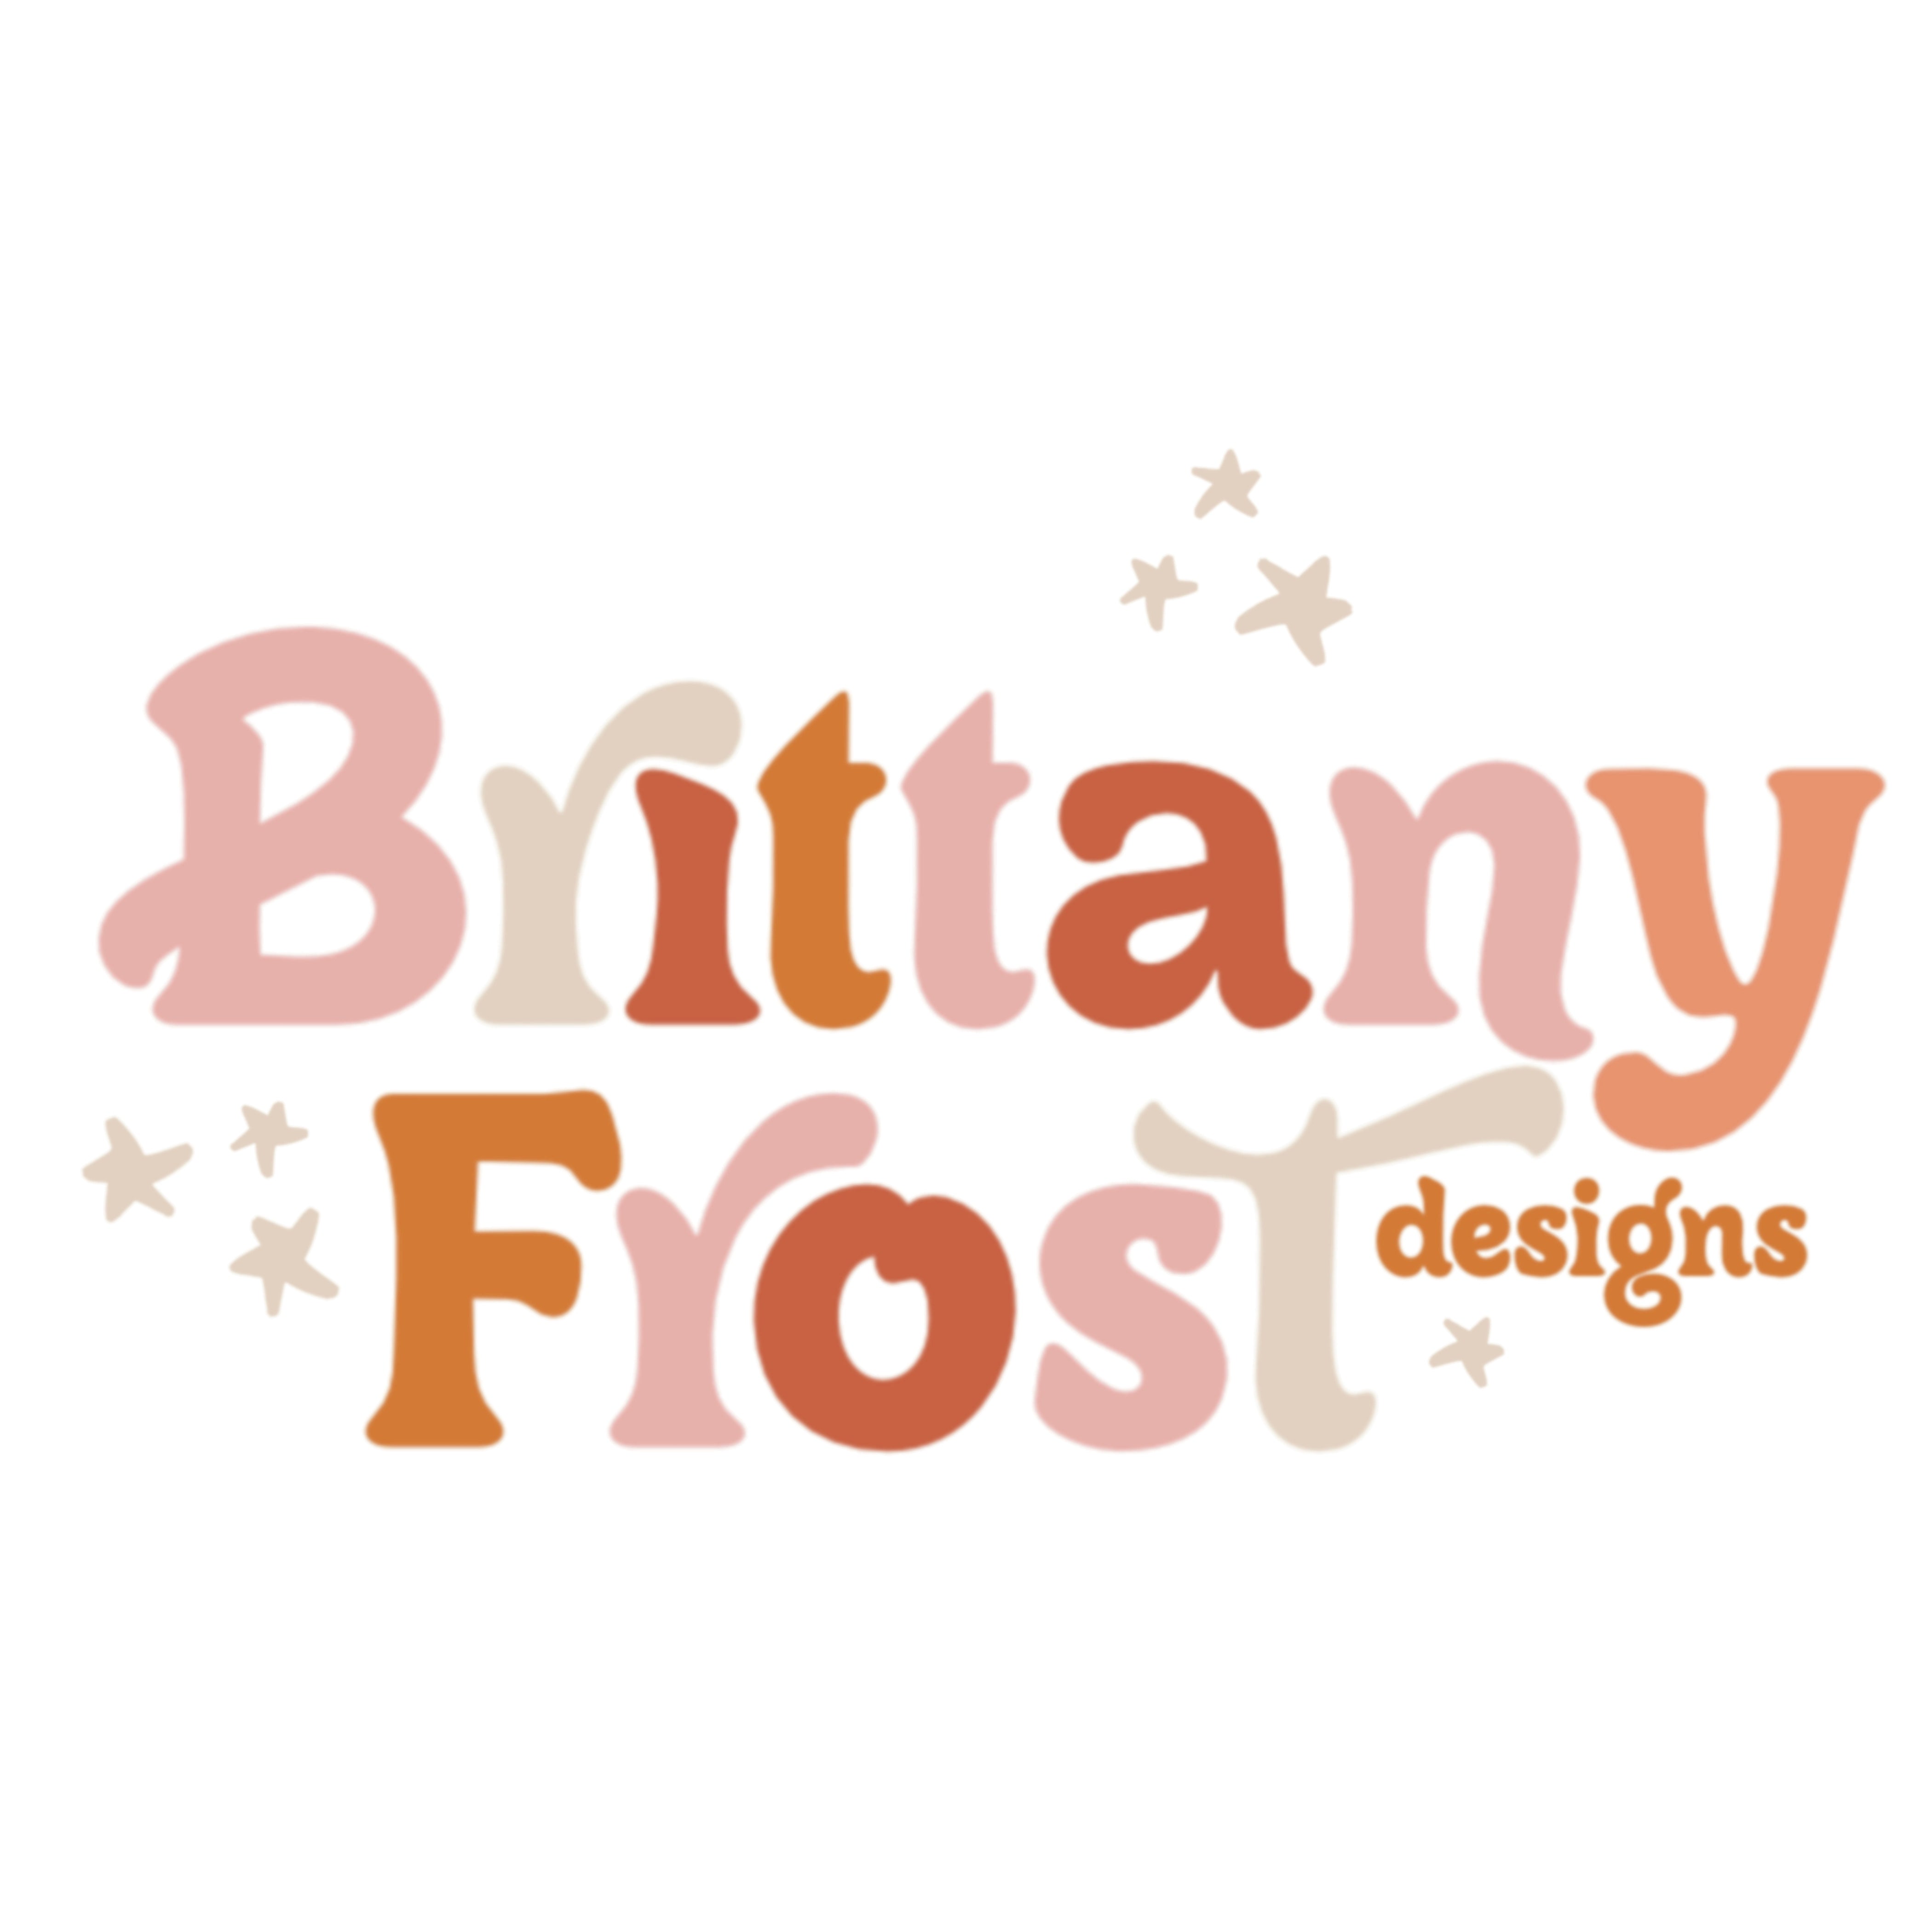 Brittany Frost Designs